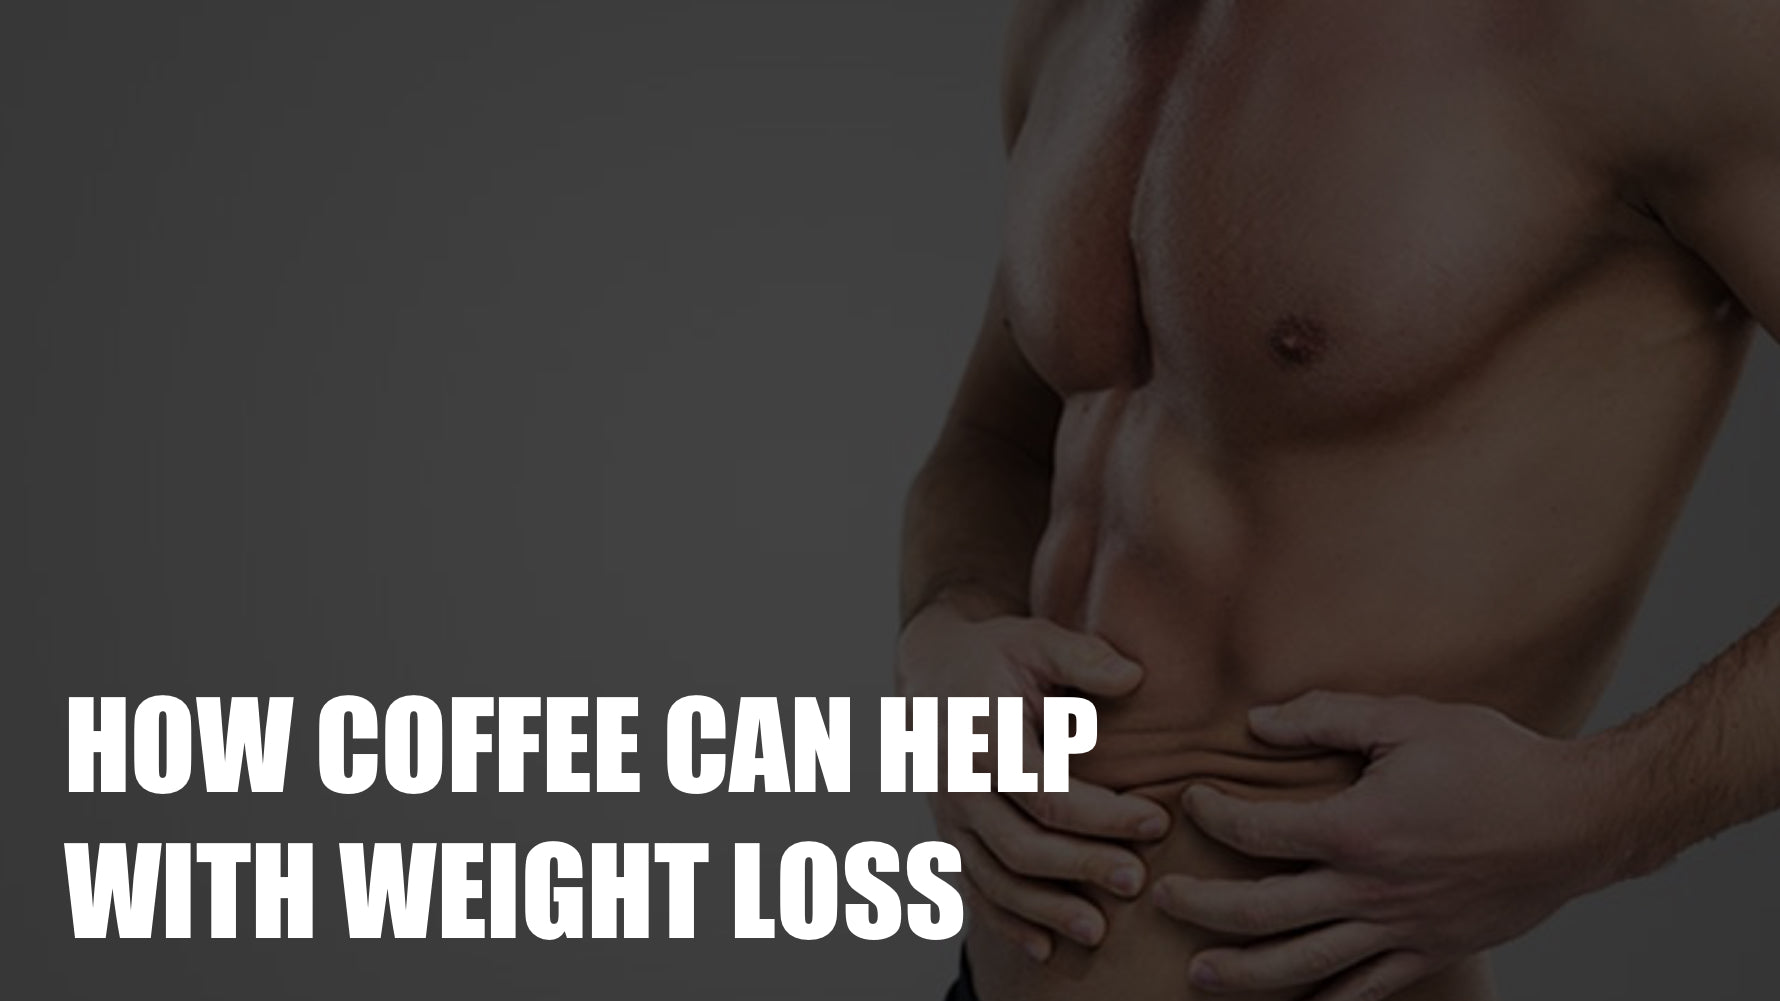 How Coffee Can Help With Weight Loss